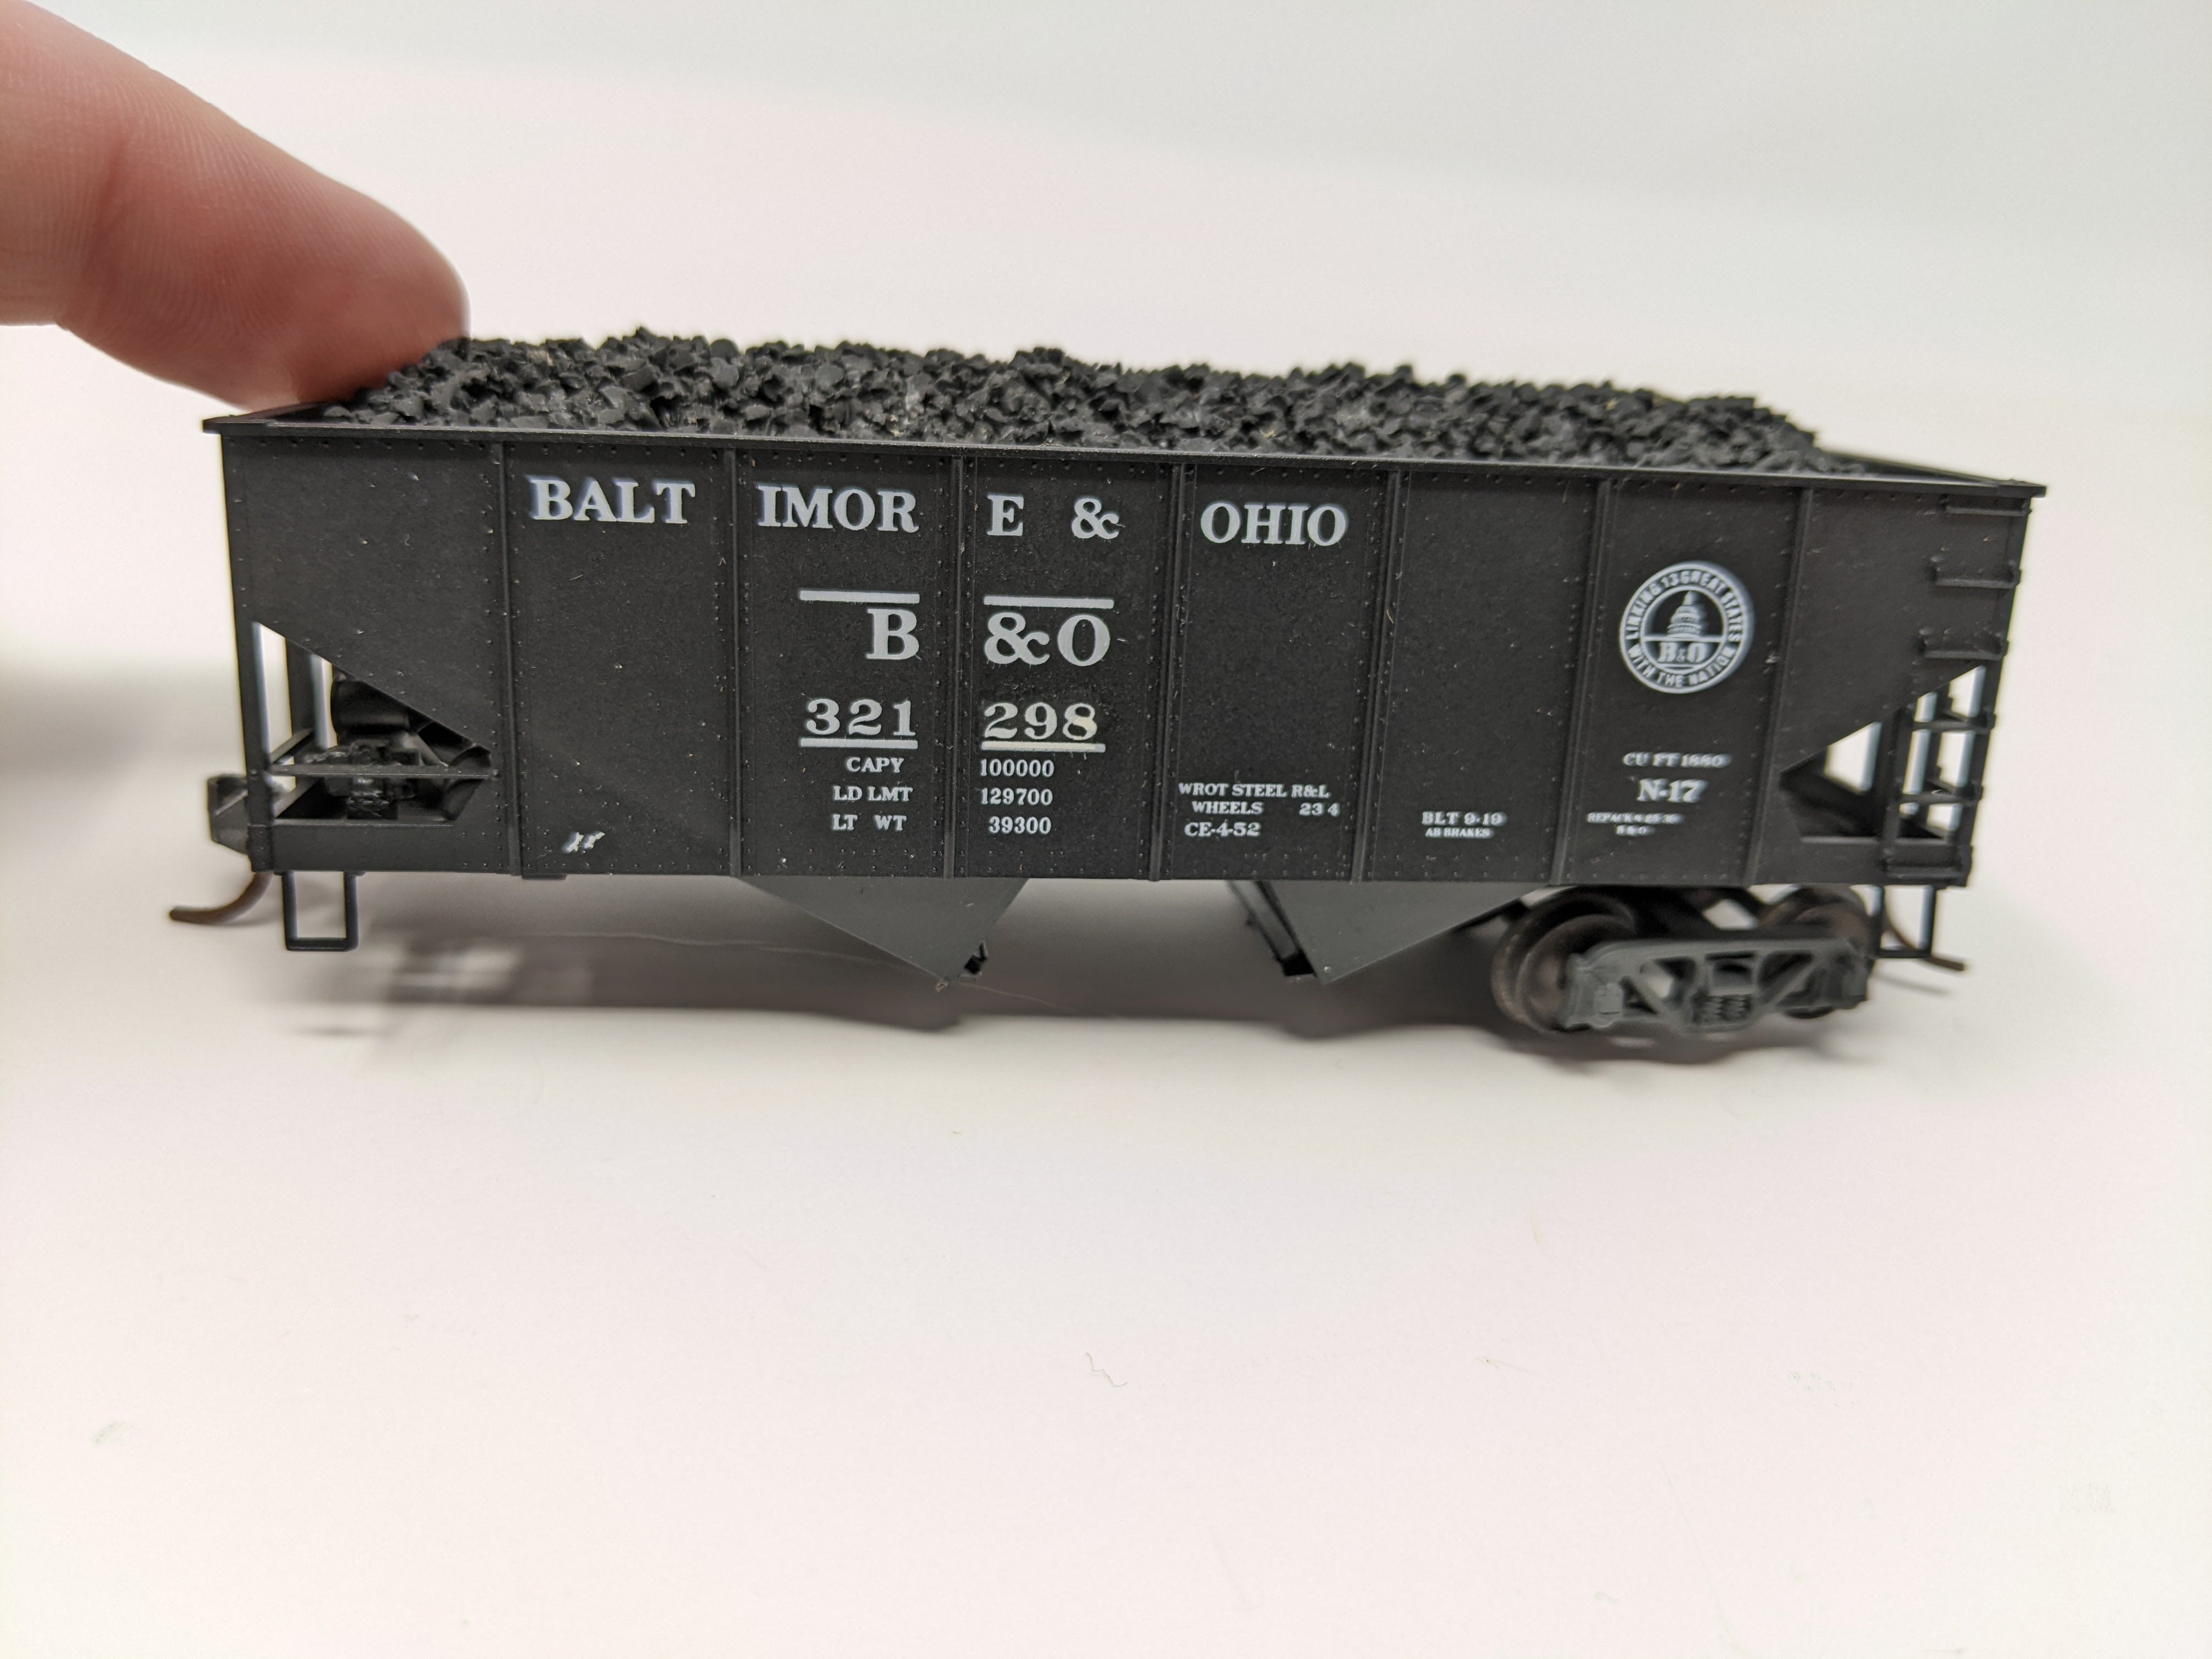 USED Accurail HO Scale, 2 Bay Open Hopper, Baltimore and Ohio B&O #321298, Custom Number, Read Description